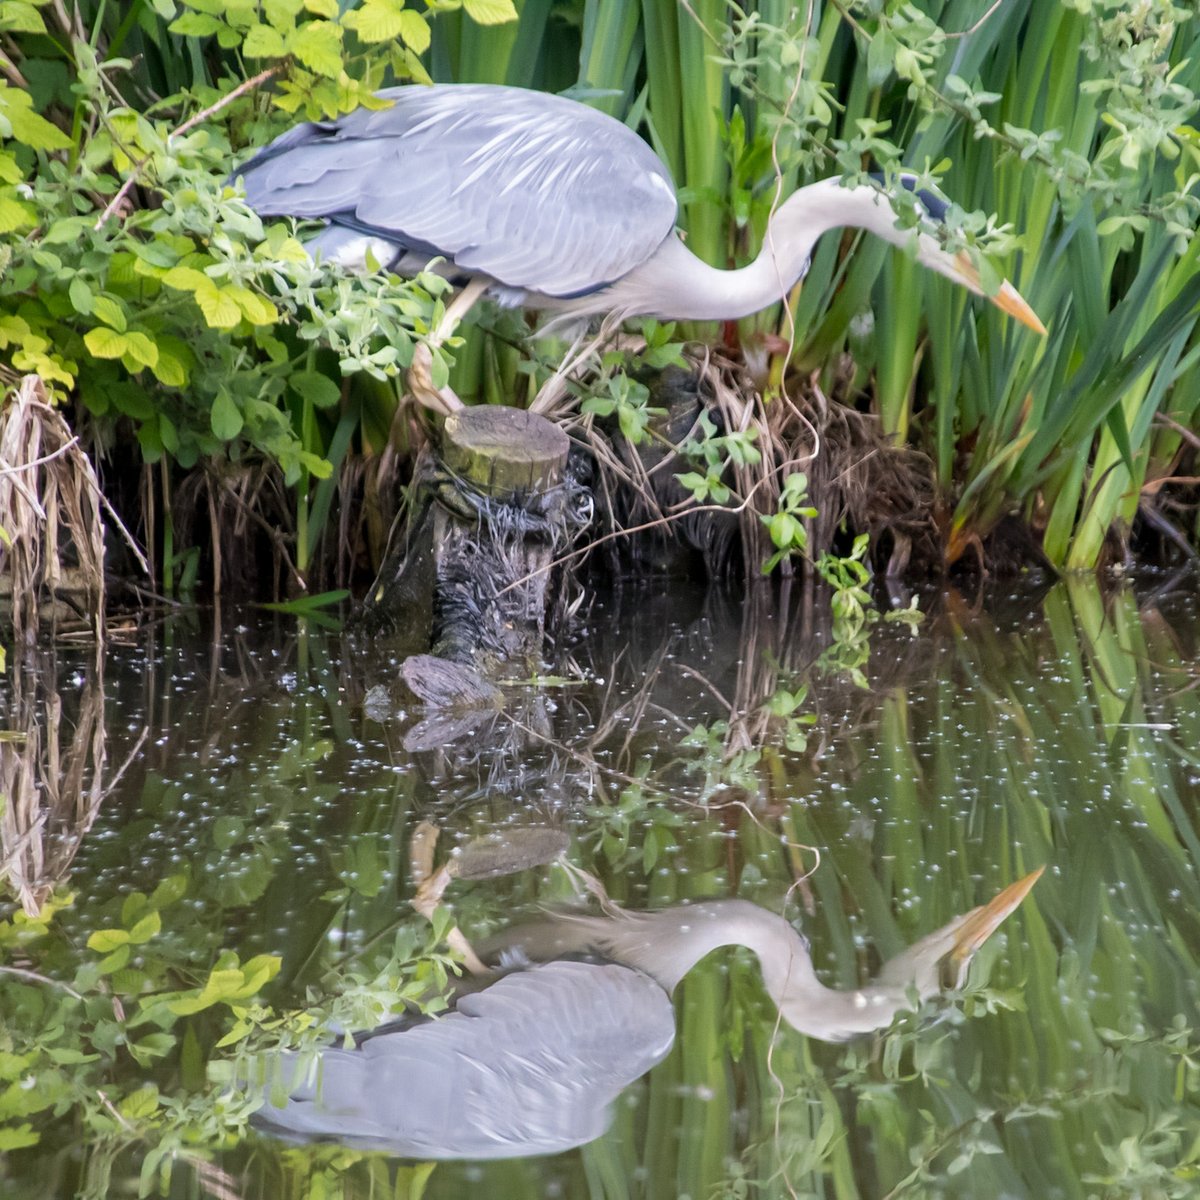 #Heron posed with his reflections, ready to strike on #DudleyNo2Canal. #BoatsThatTweet #KeepCanalsAlive #LifesBetterByWater #FundBritainsWaterways #BCN #BCNS #WildlifePhotography #NaturePhotography waterways.photography